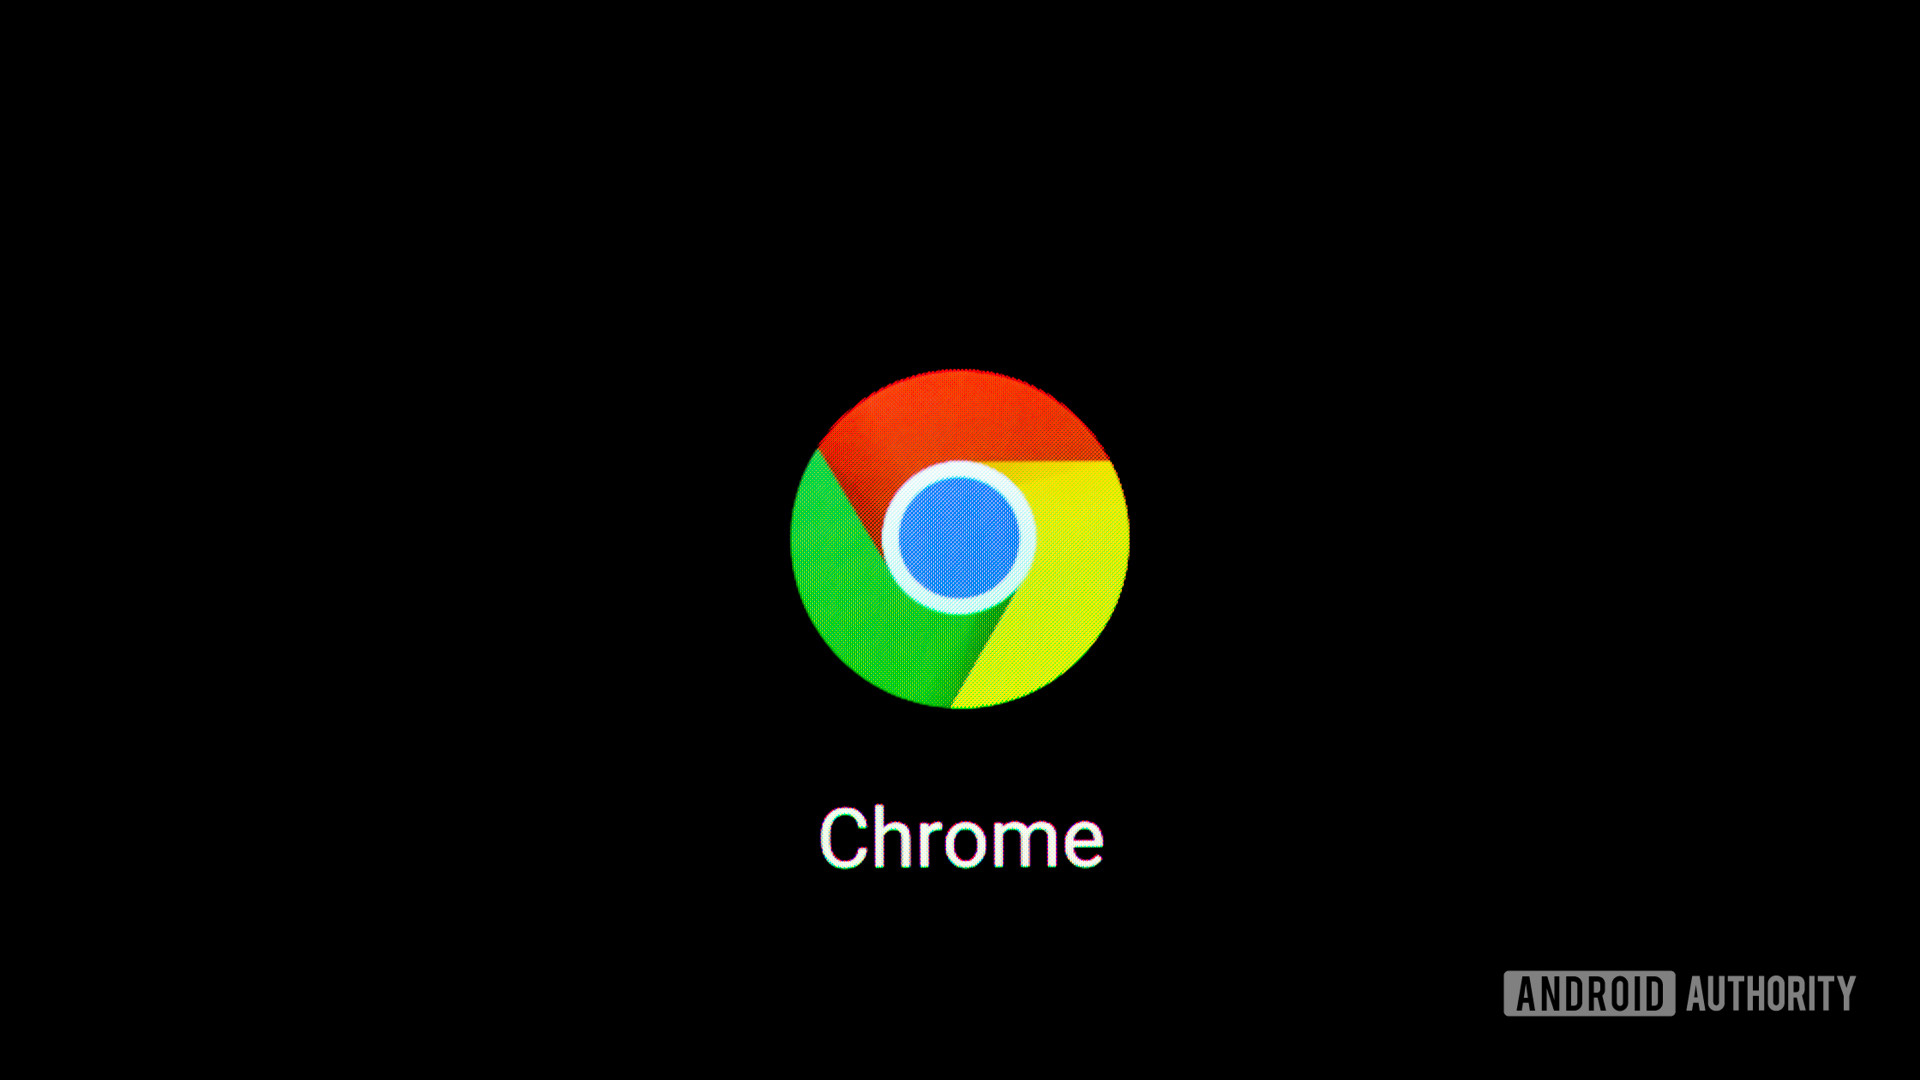 PSA: You should update Chrome on your PC and phone due to this serious flaw